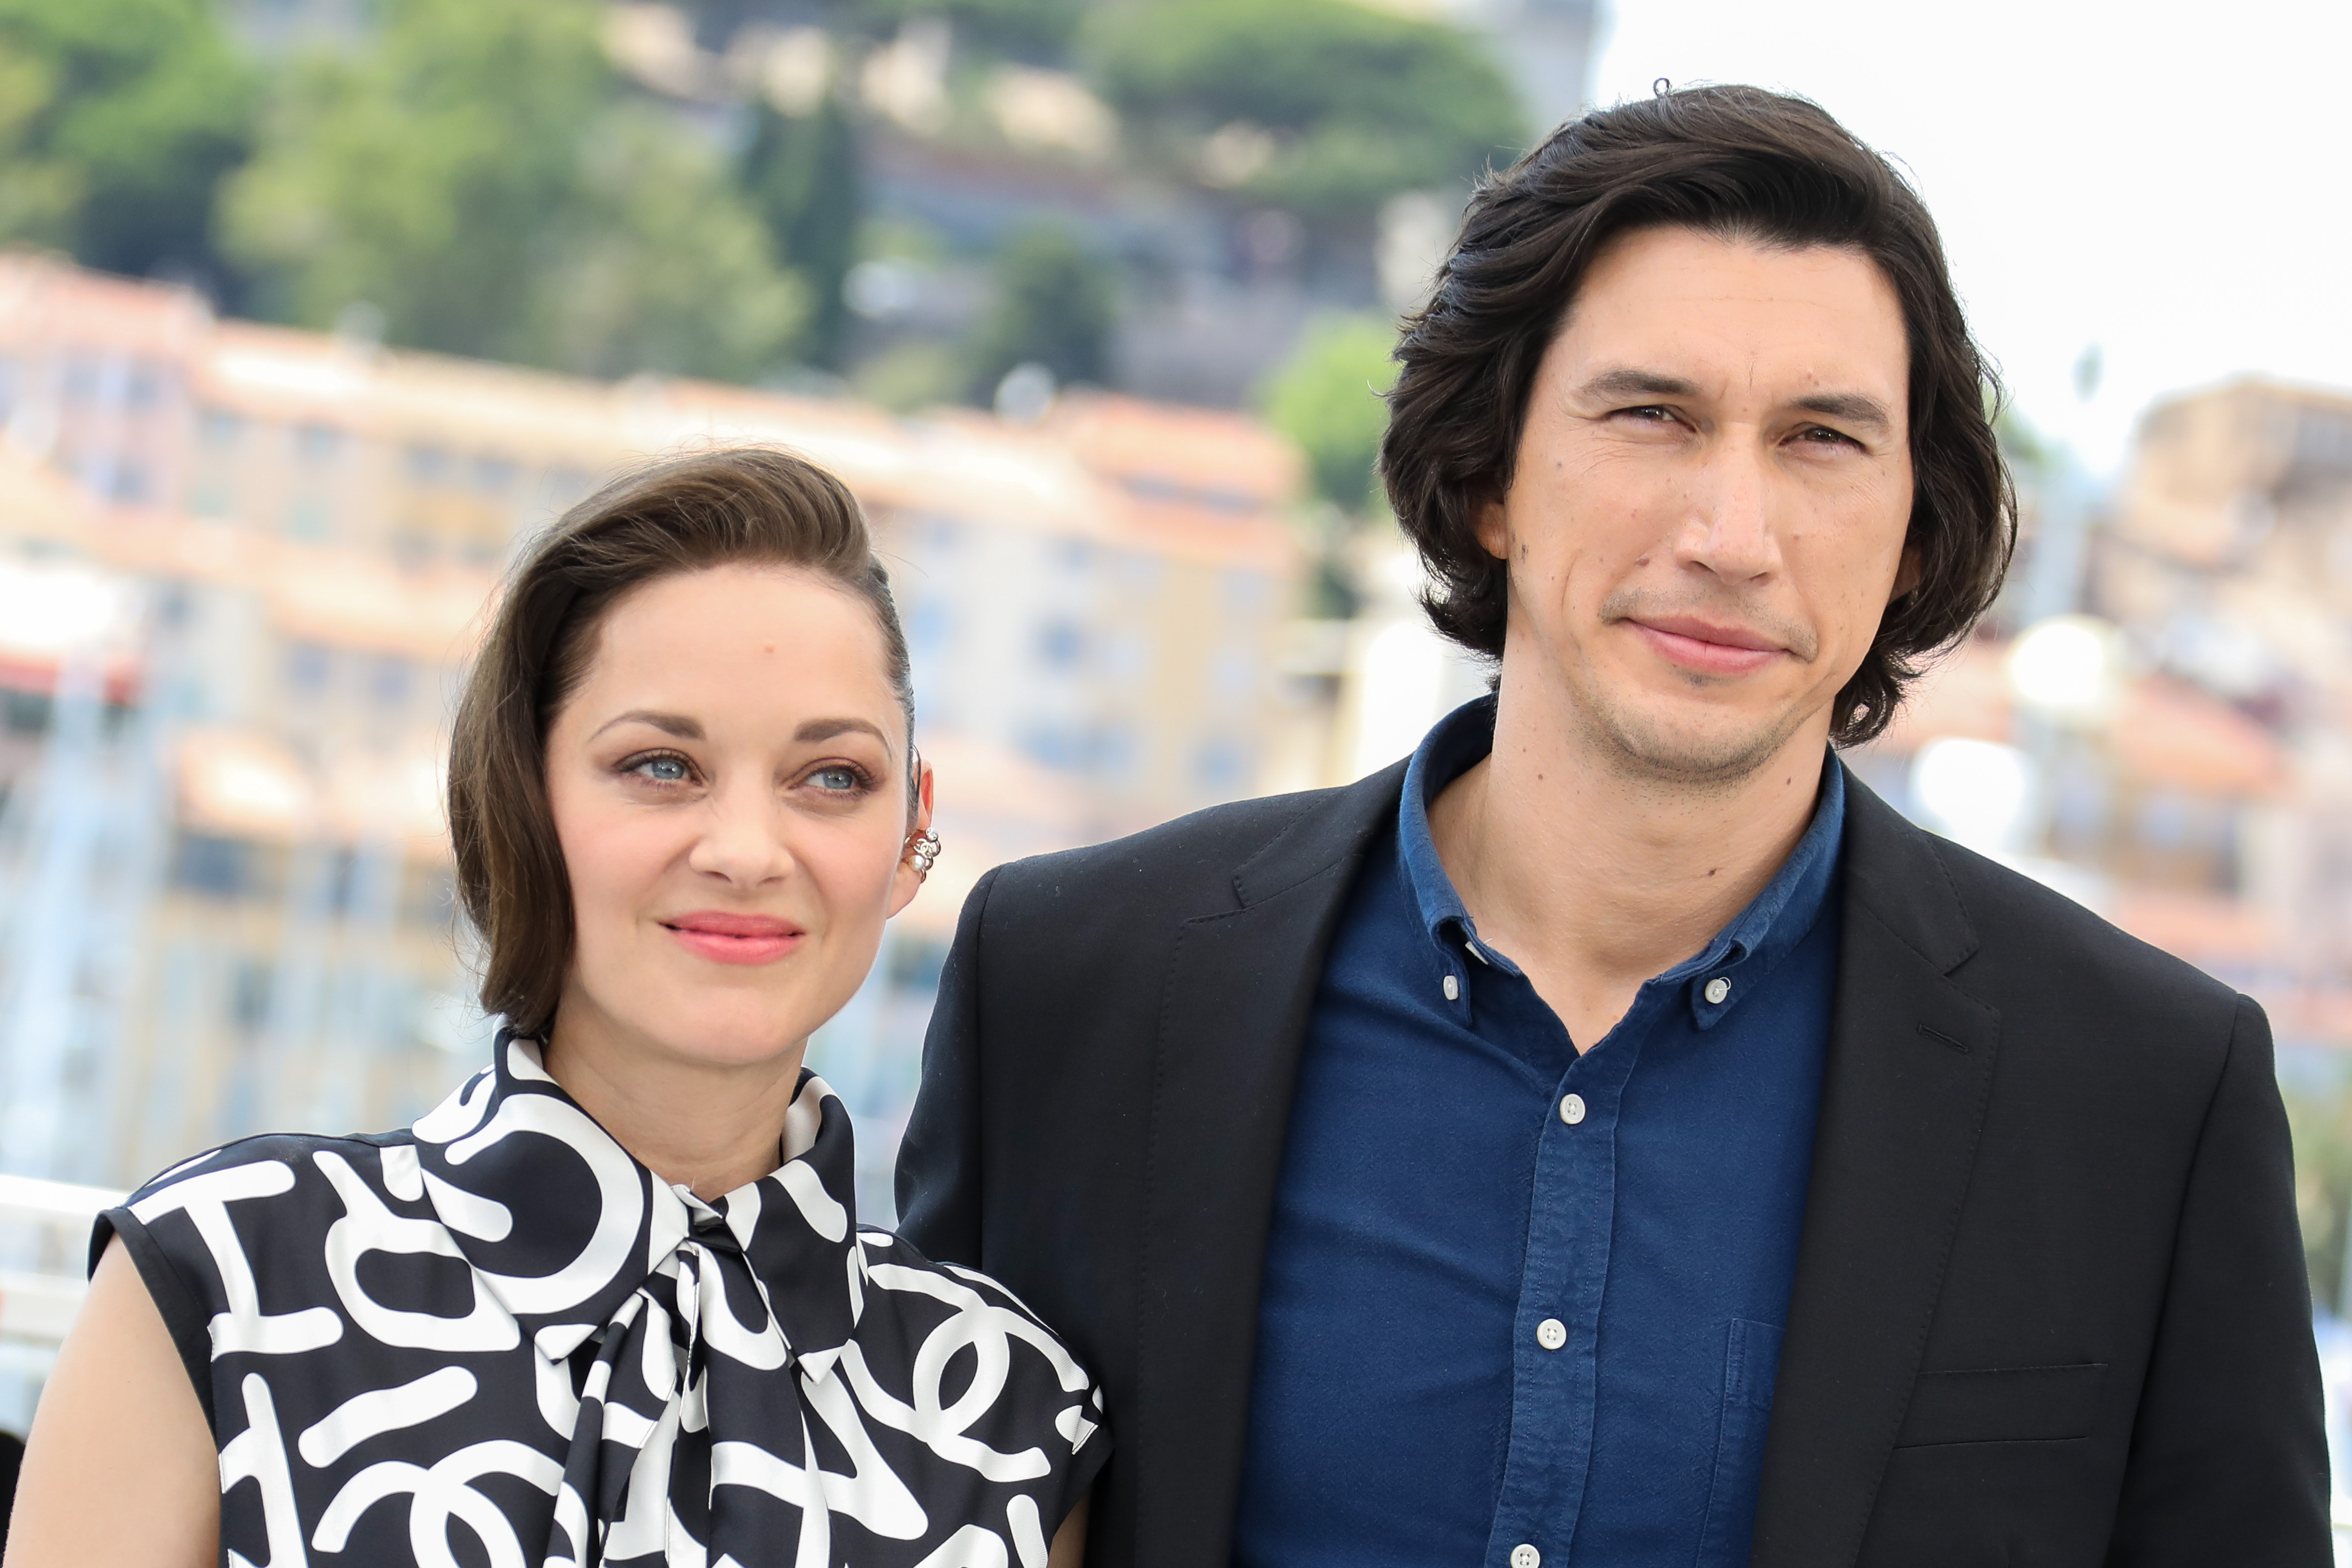 Marion Cotillard and Adam Driver attend the 'Annette' premiere at Cannes 2021